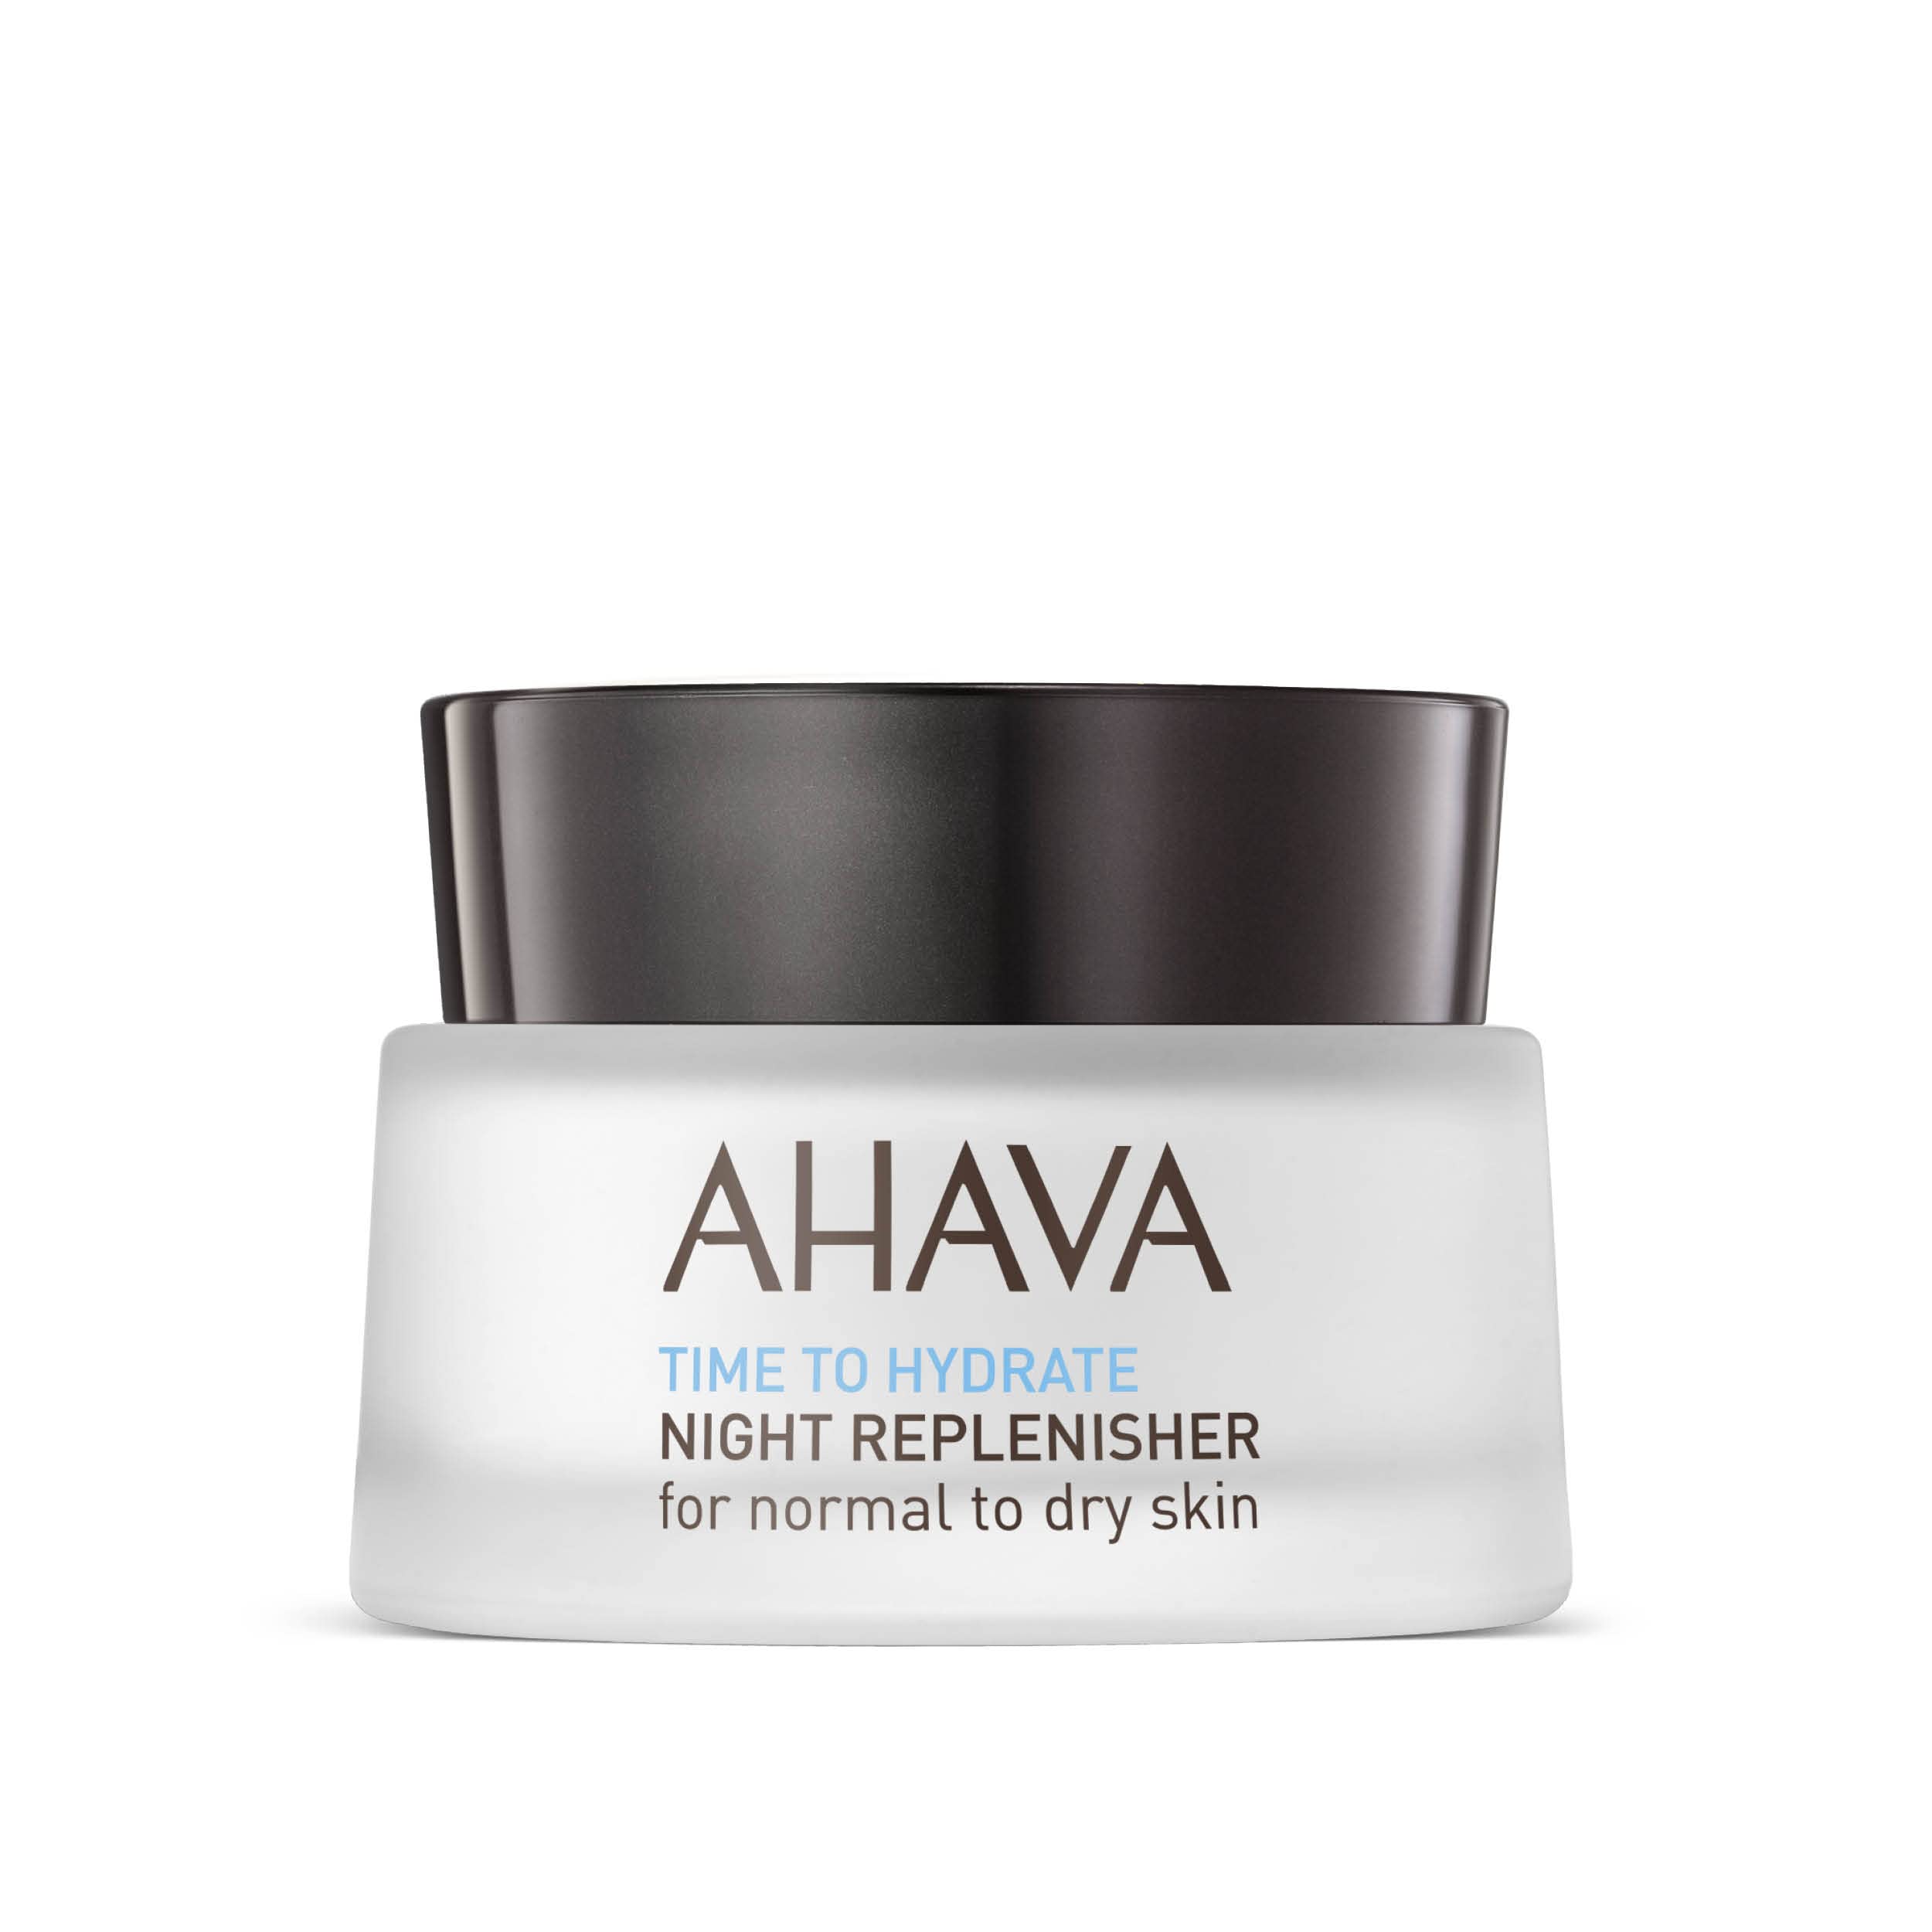 Ahava Time to Hydrate Night Replenisher, 1er Pack (1 x 50 ml) frisch